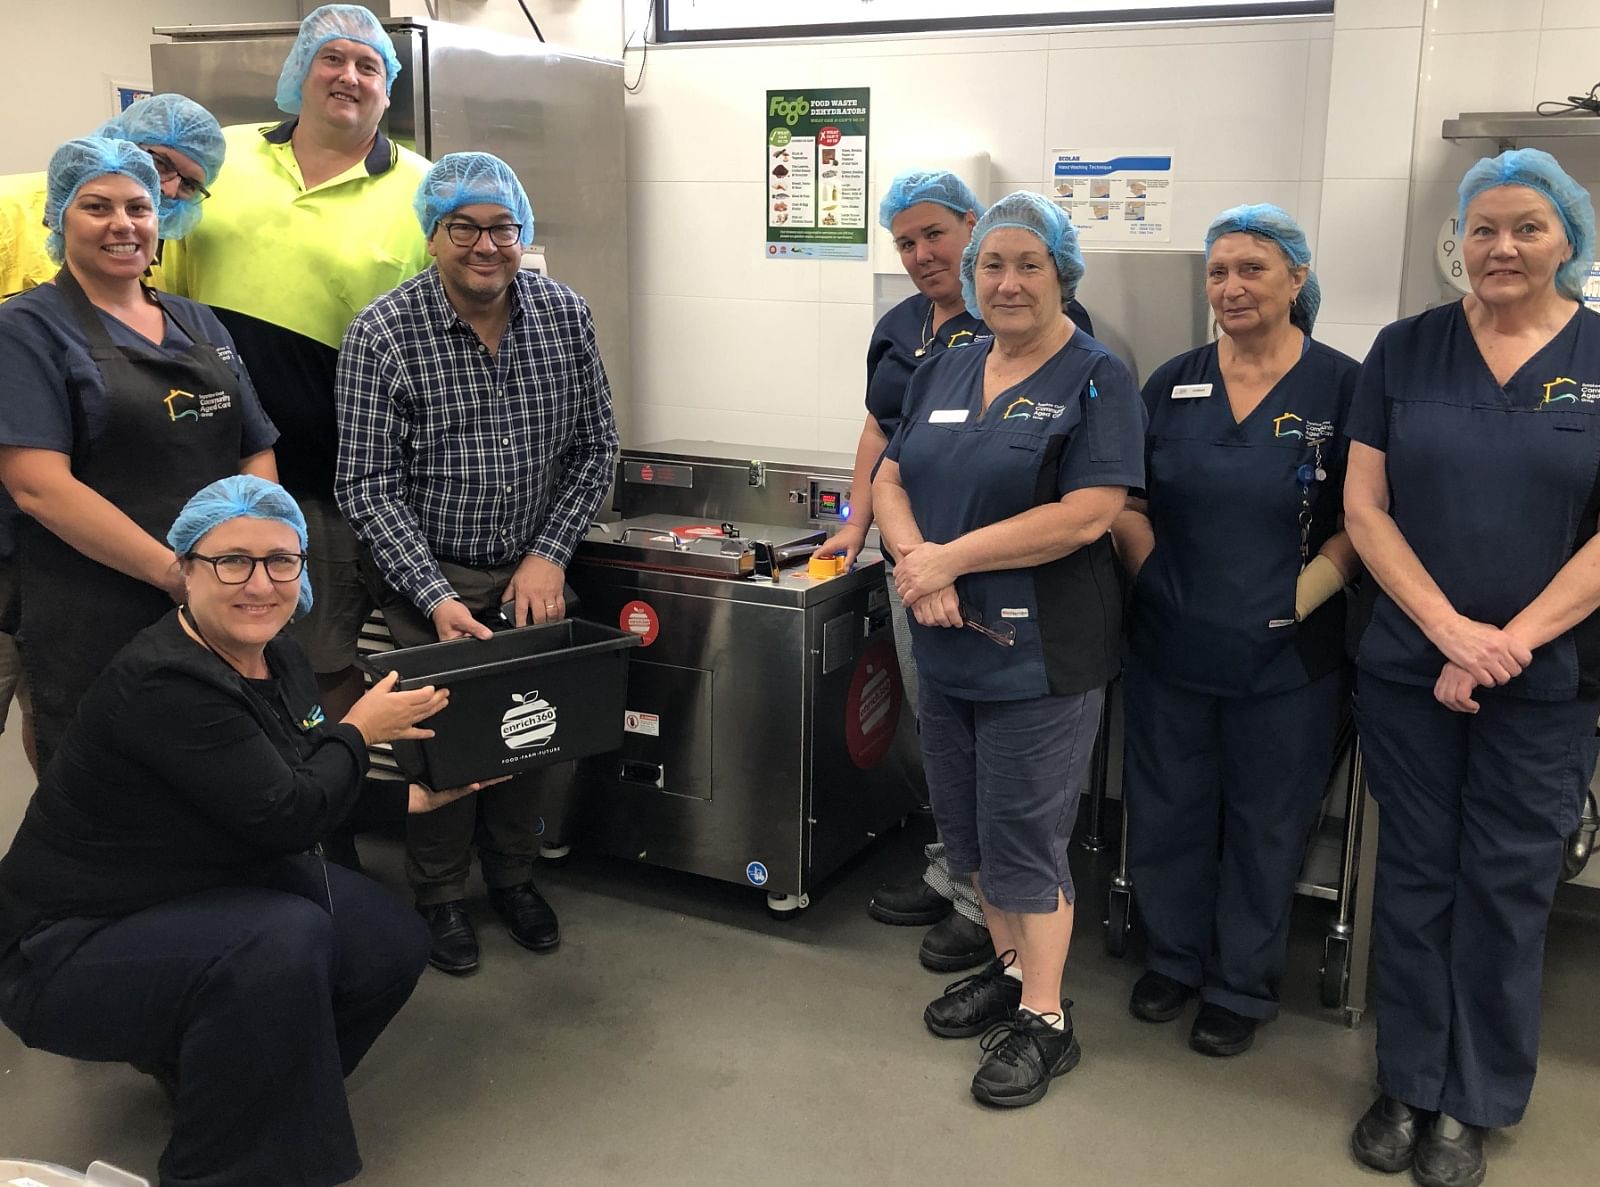 Staff at Hillgrove House being trained how to use the new food dehydrators by Enrich360 CEO Dean Turner, with BVSC Waste Project Officer Rechelle Fisher.